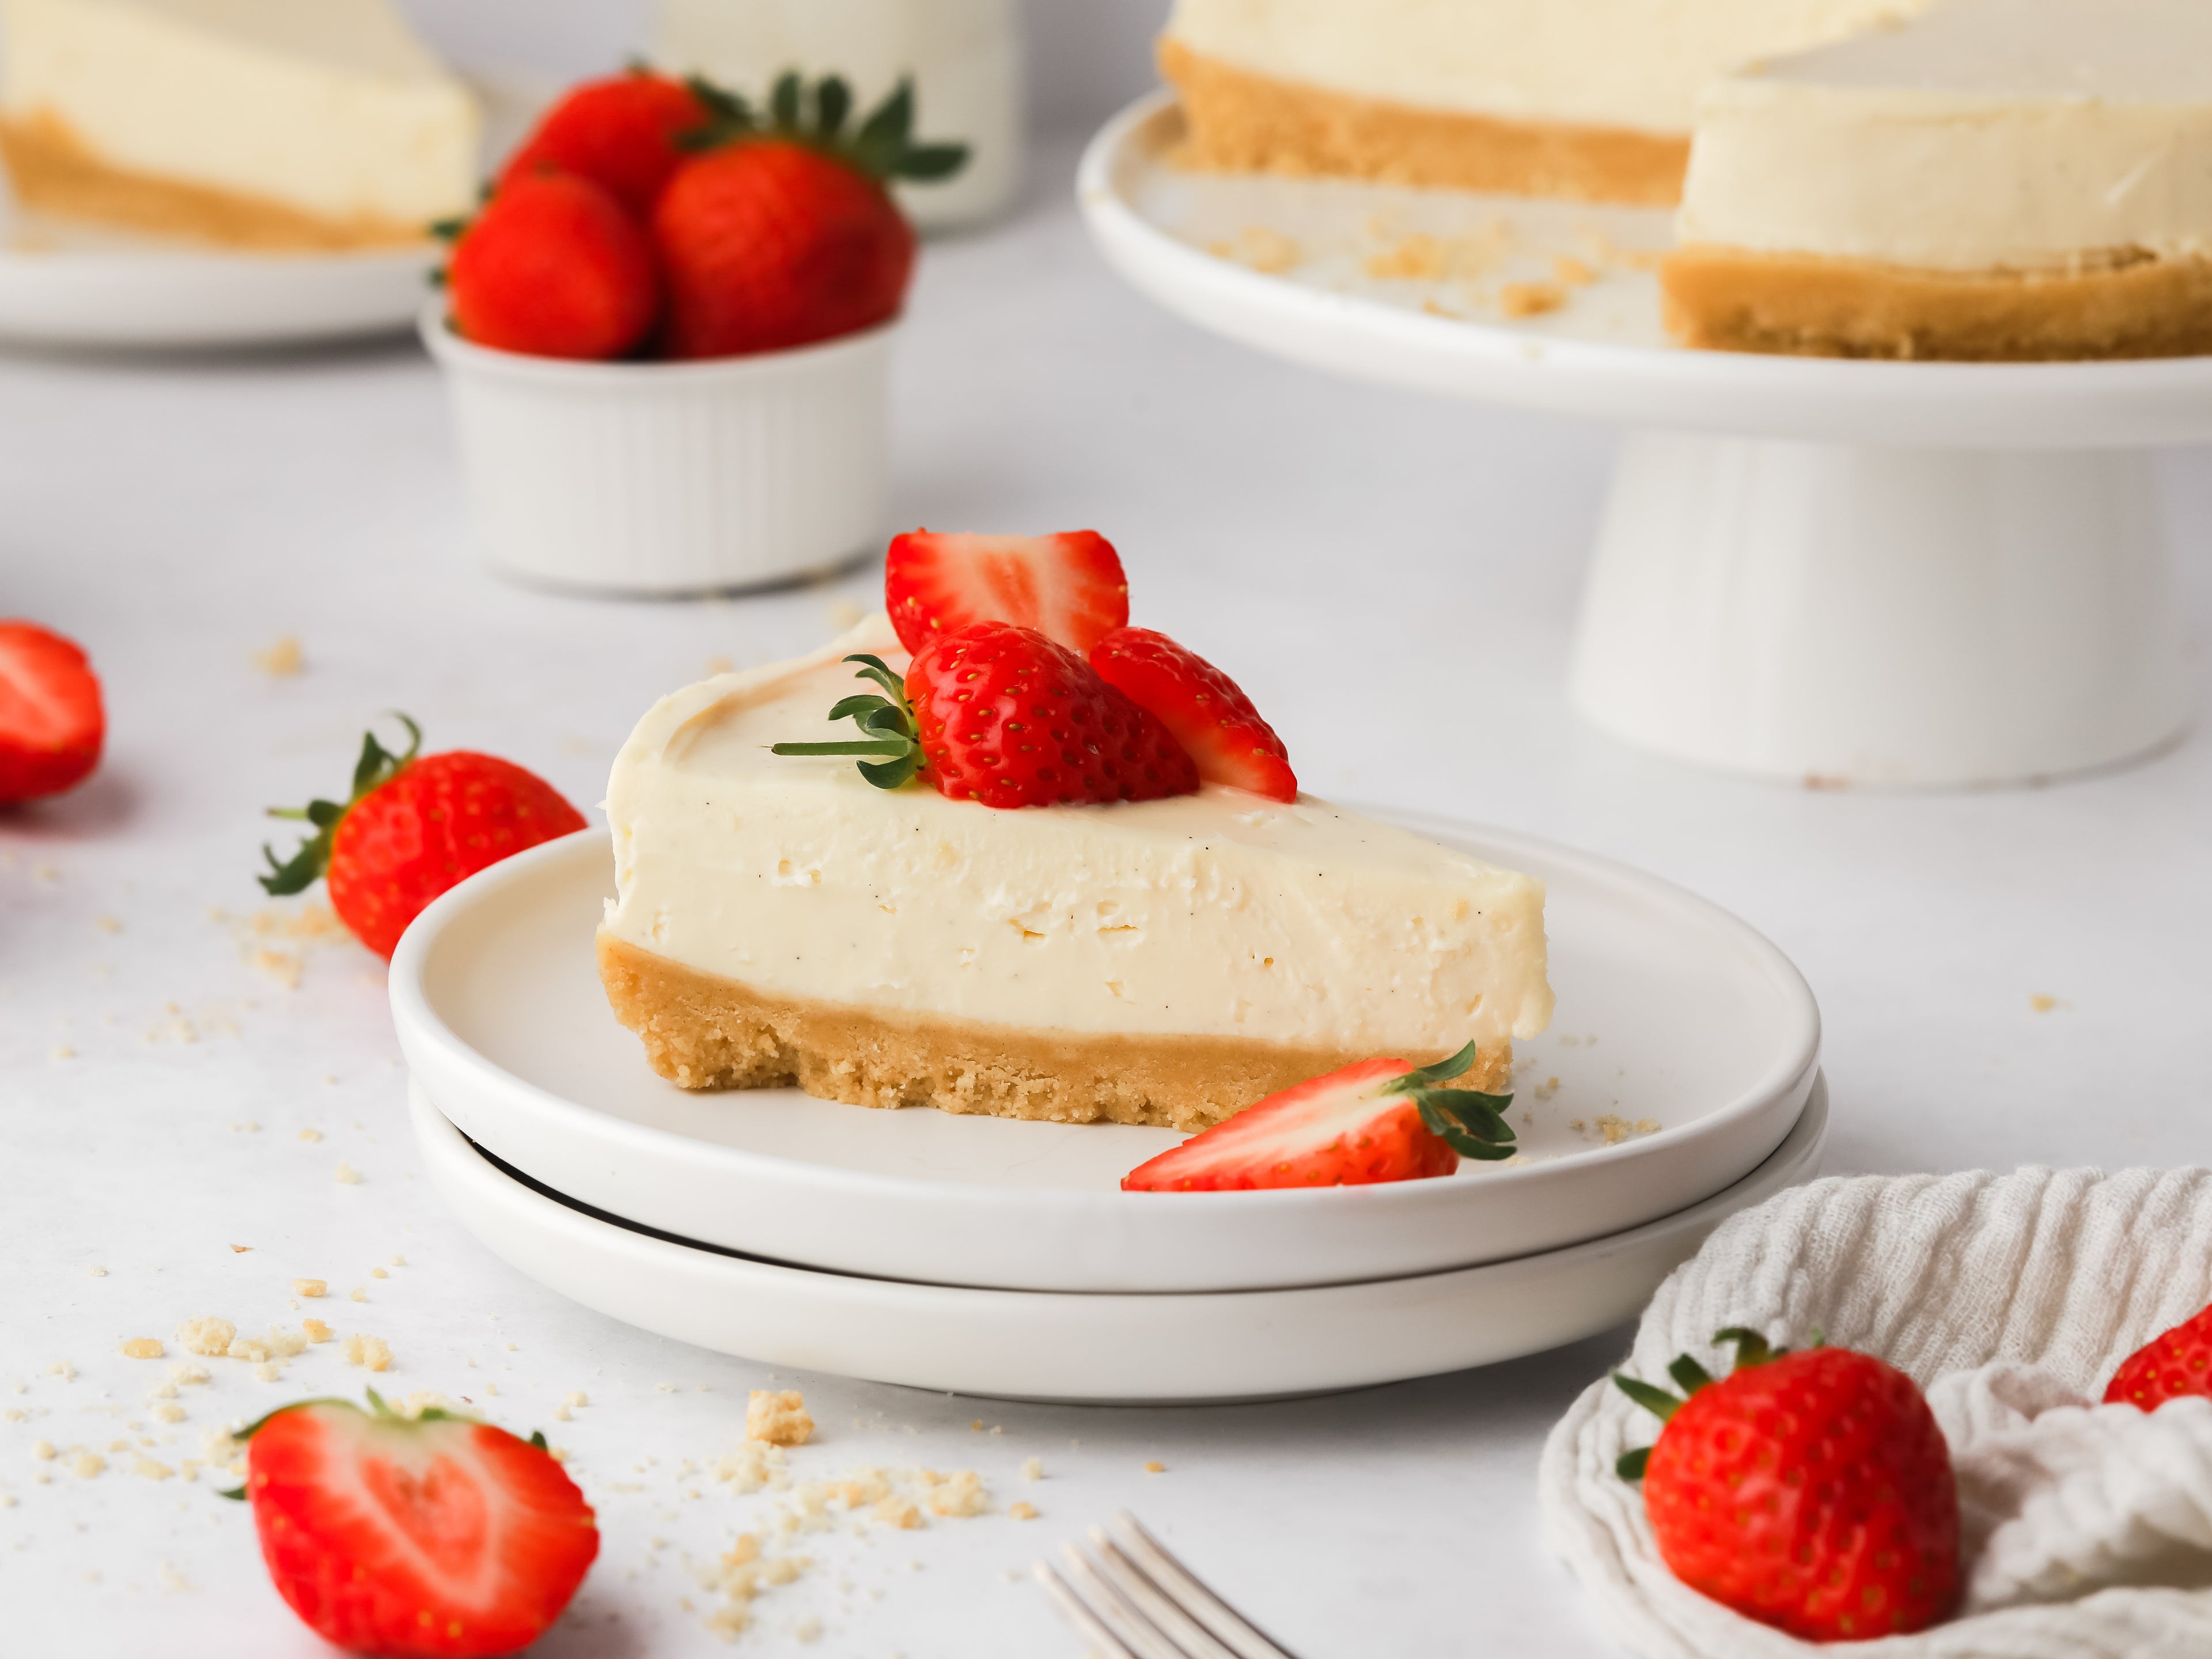 Slice of vanilla cheesecake with strawberries on top